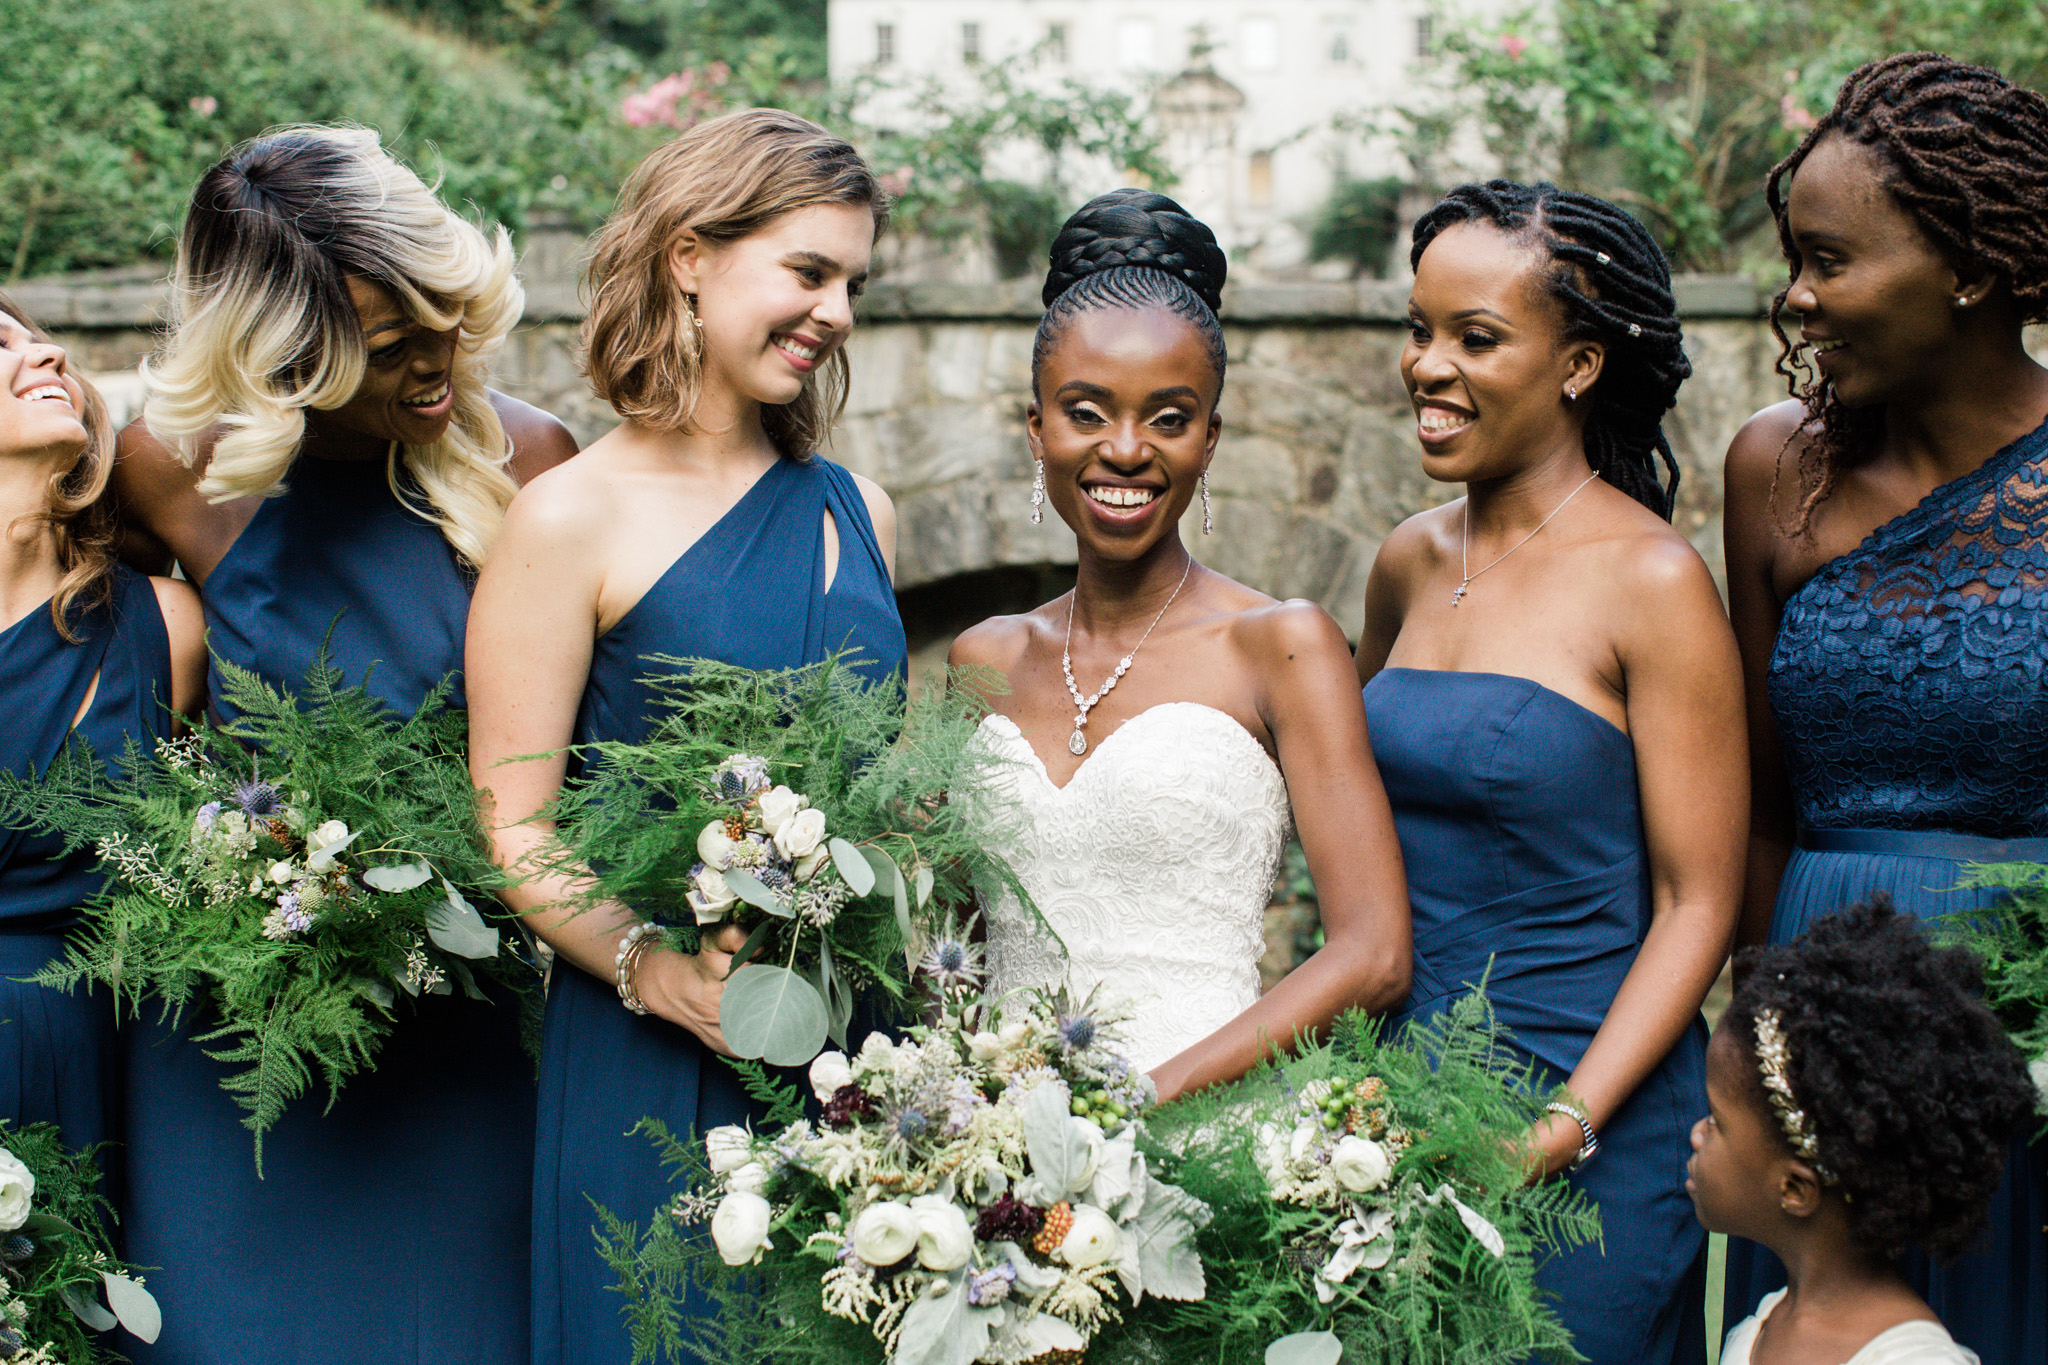 Bridesmaid dresses complement the classic beauty of the Swan House. Photo by Rebecca Cerasani